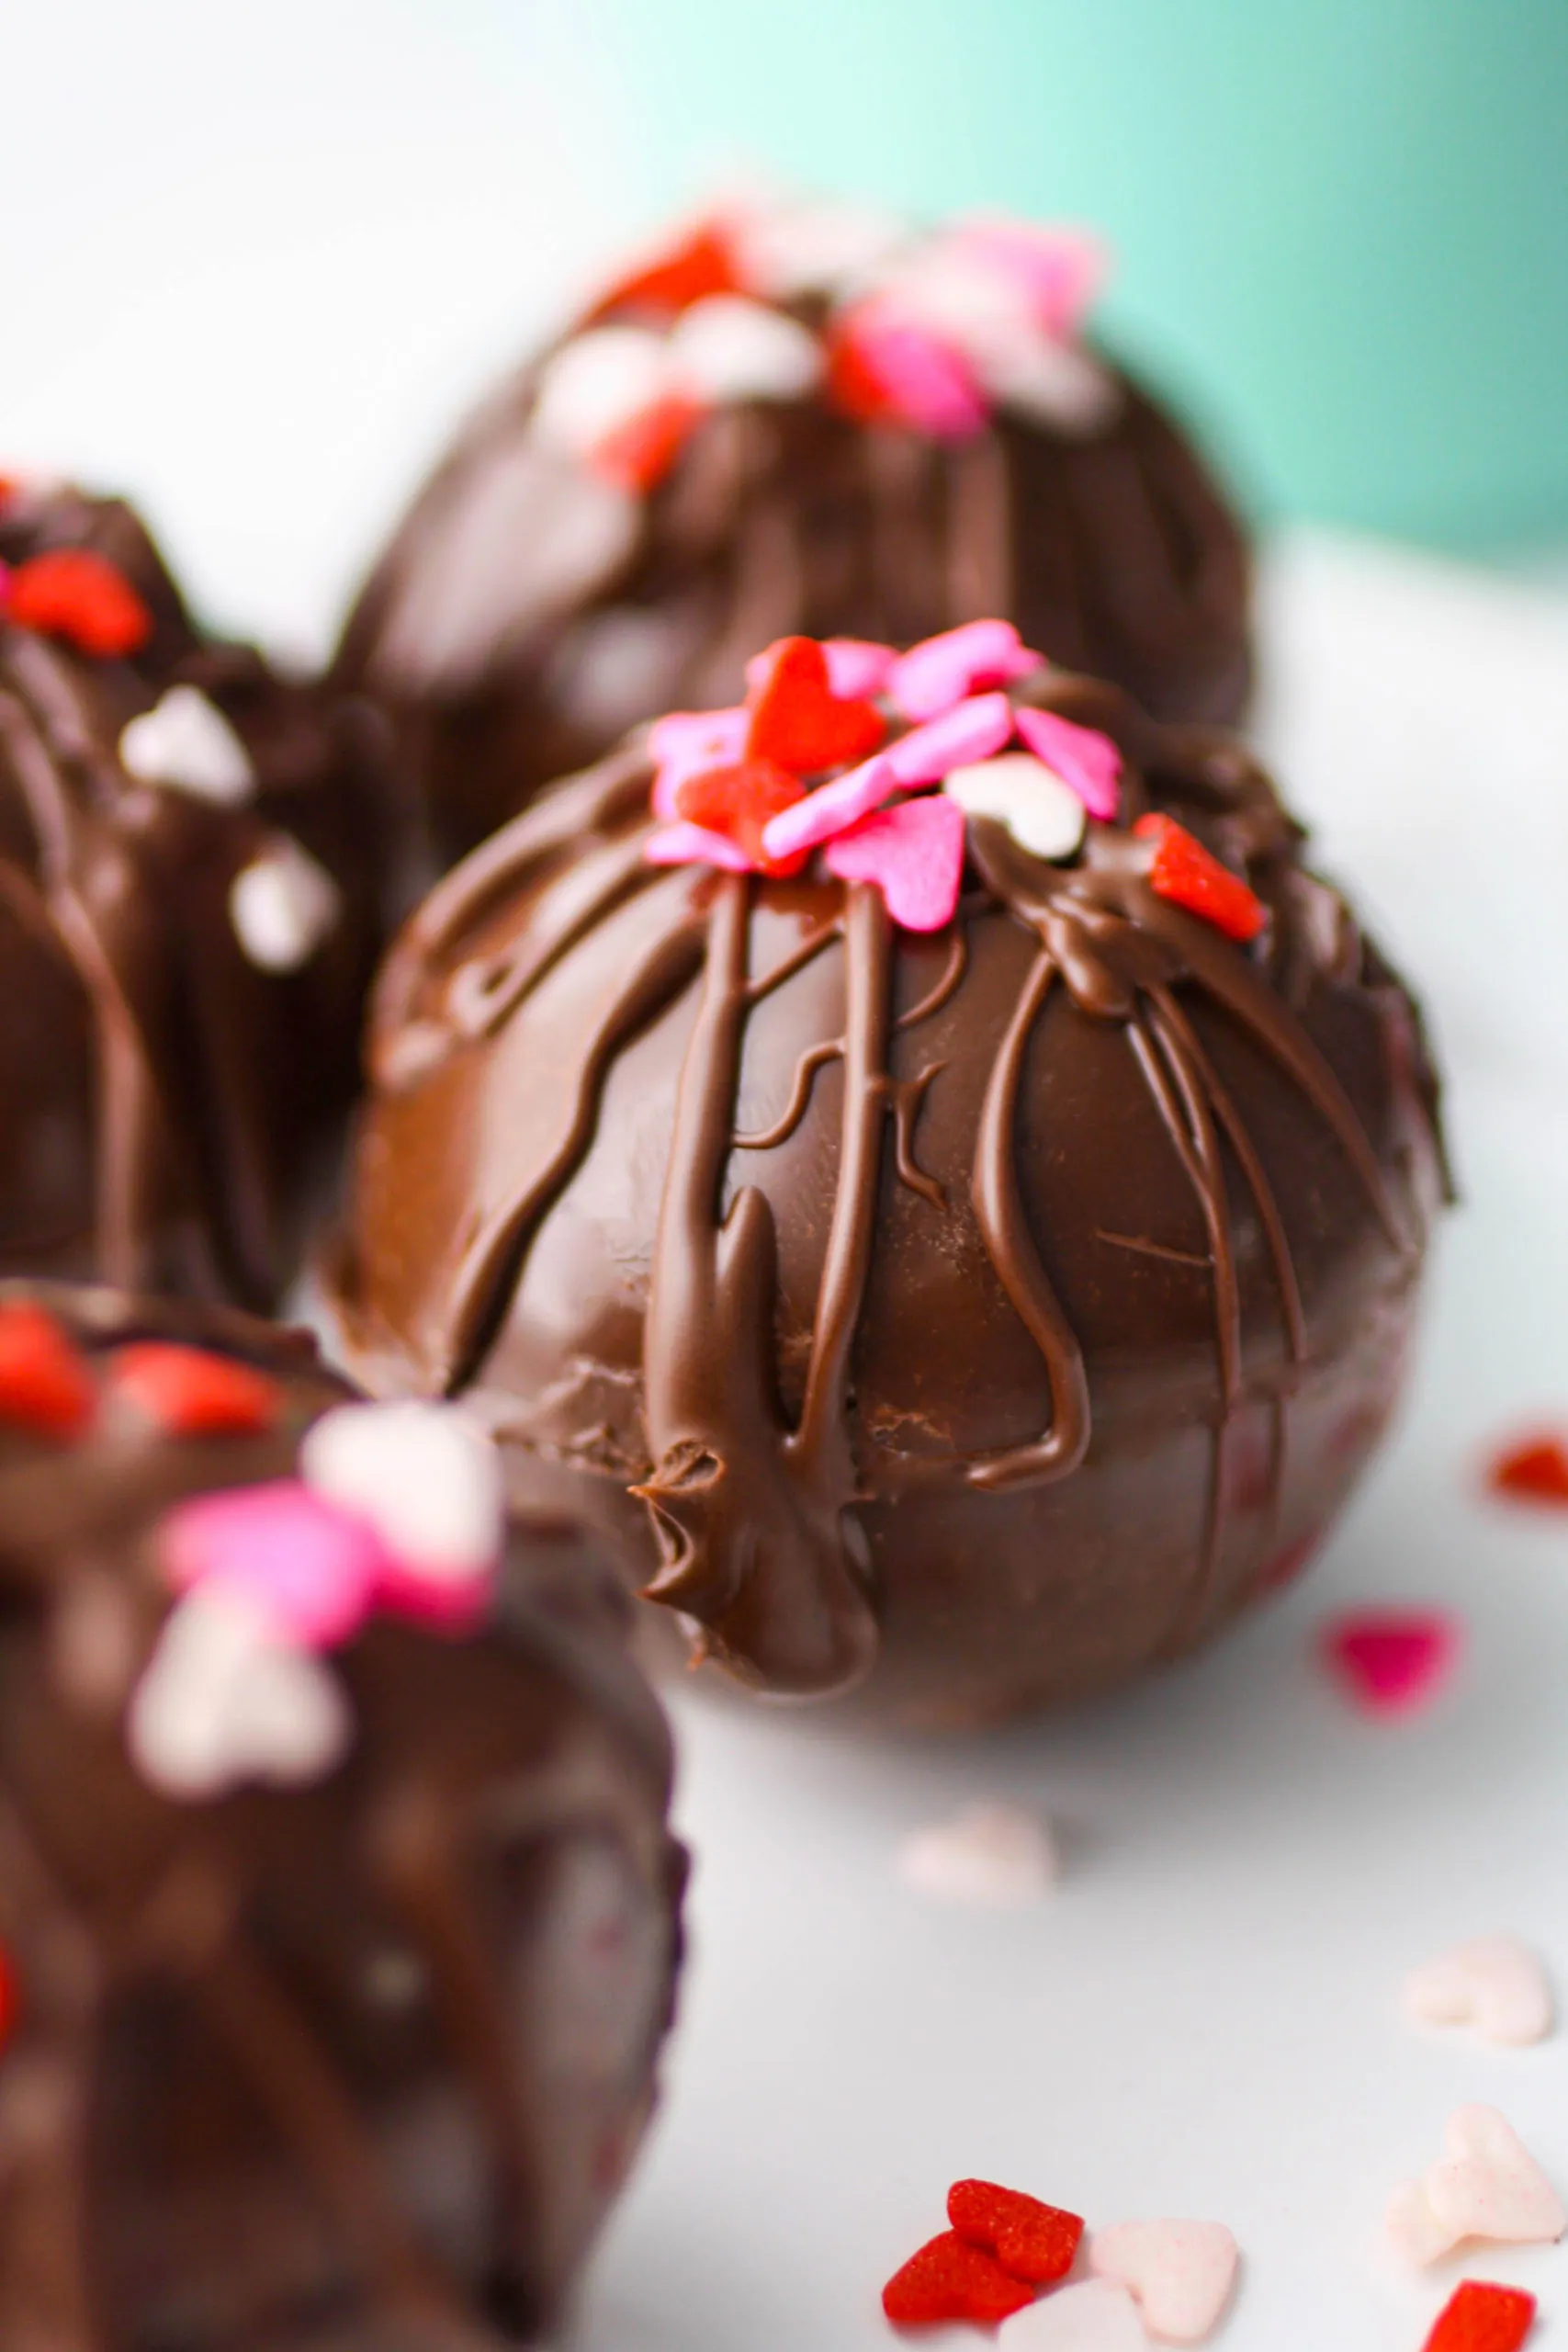 Peppermint Hot Chocolate Bombs are a fun treat to make and serve. You'll love the experience of Peppermint Hot Chocolate Bombs.